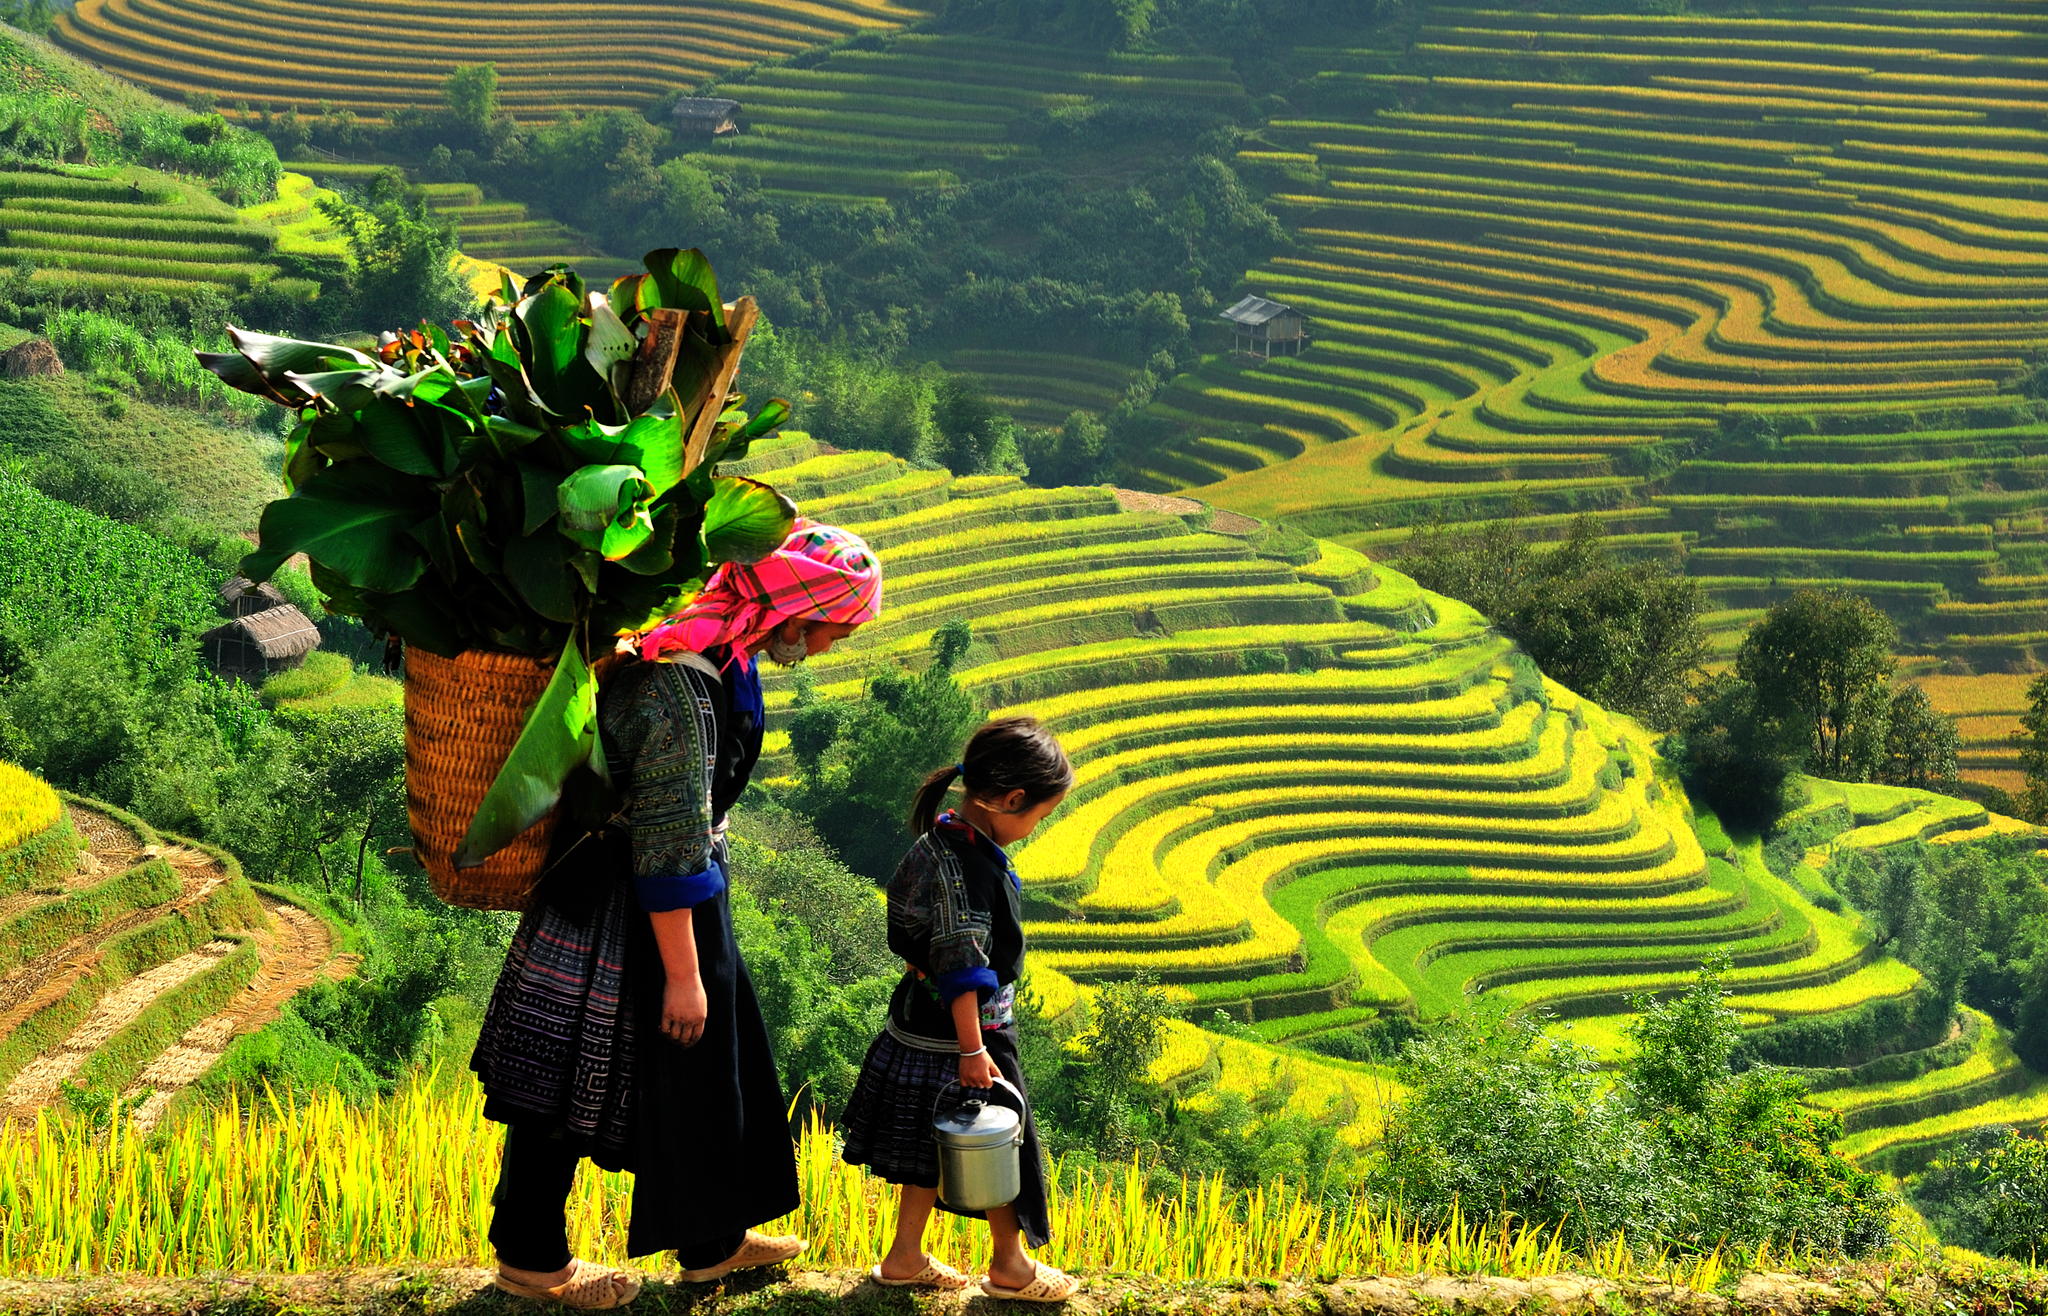 The way to Sapa is not difficult, you can choose to take a private car or a bus